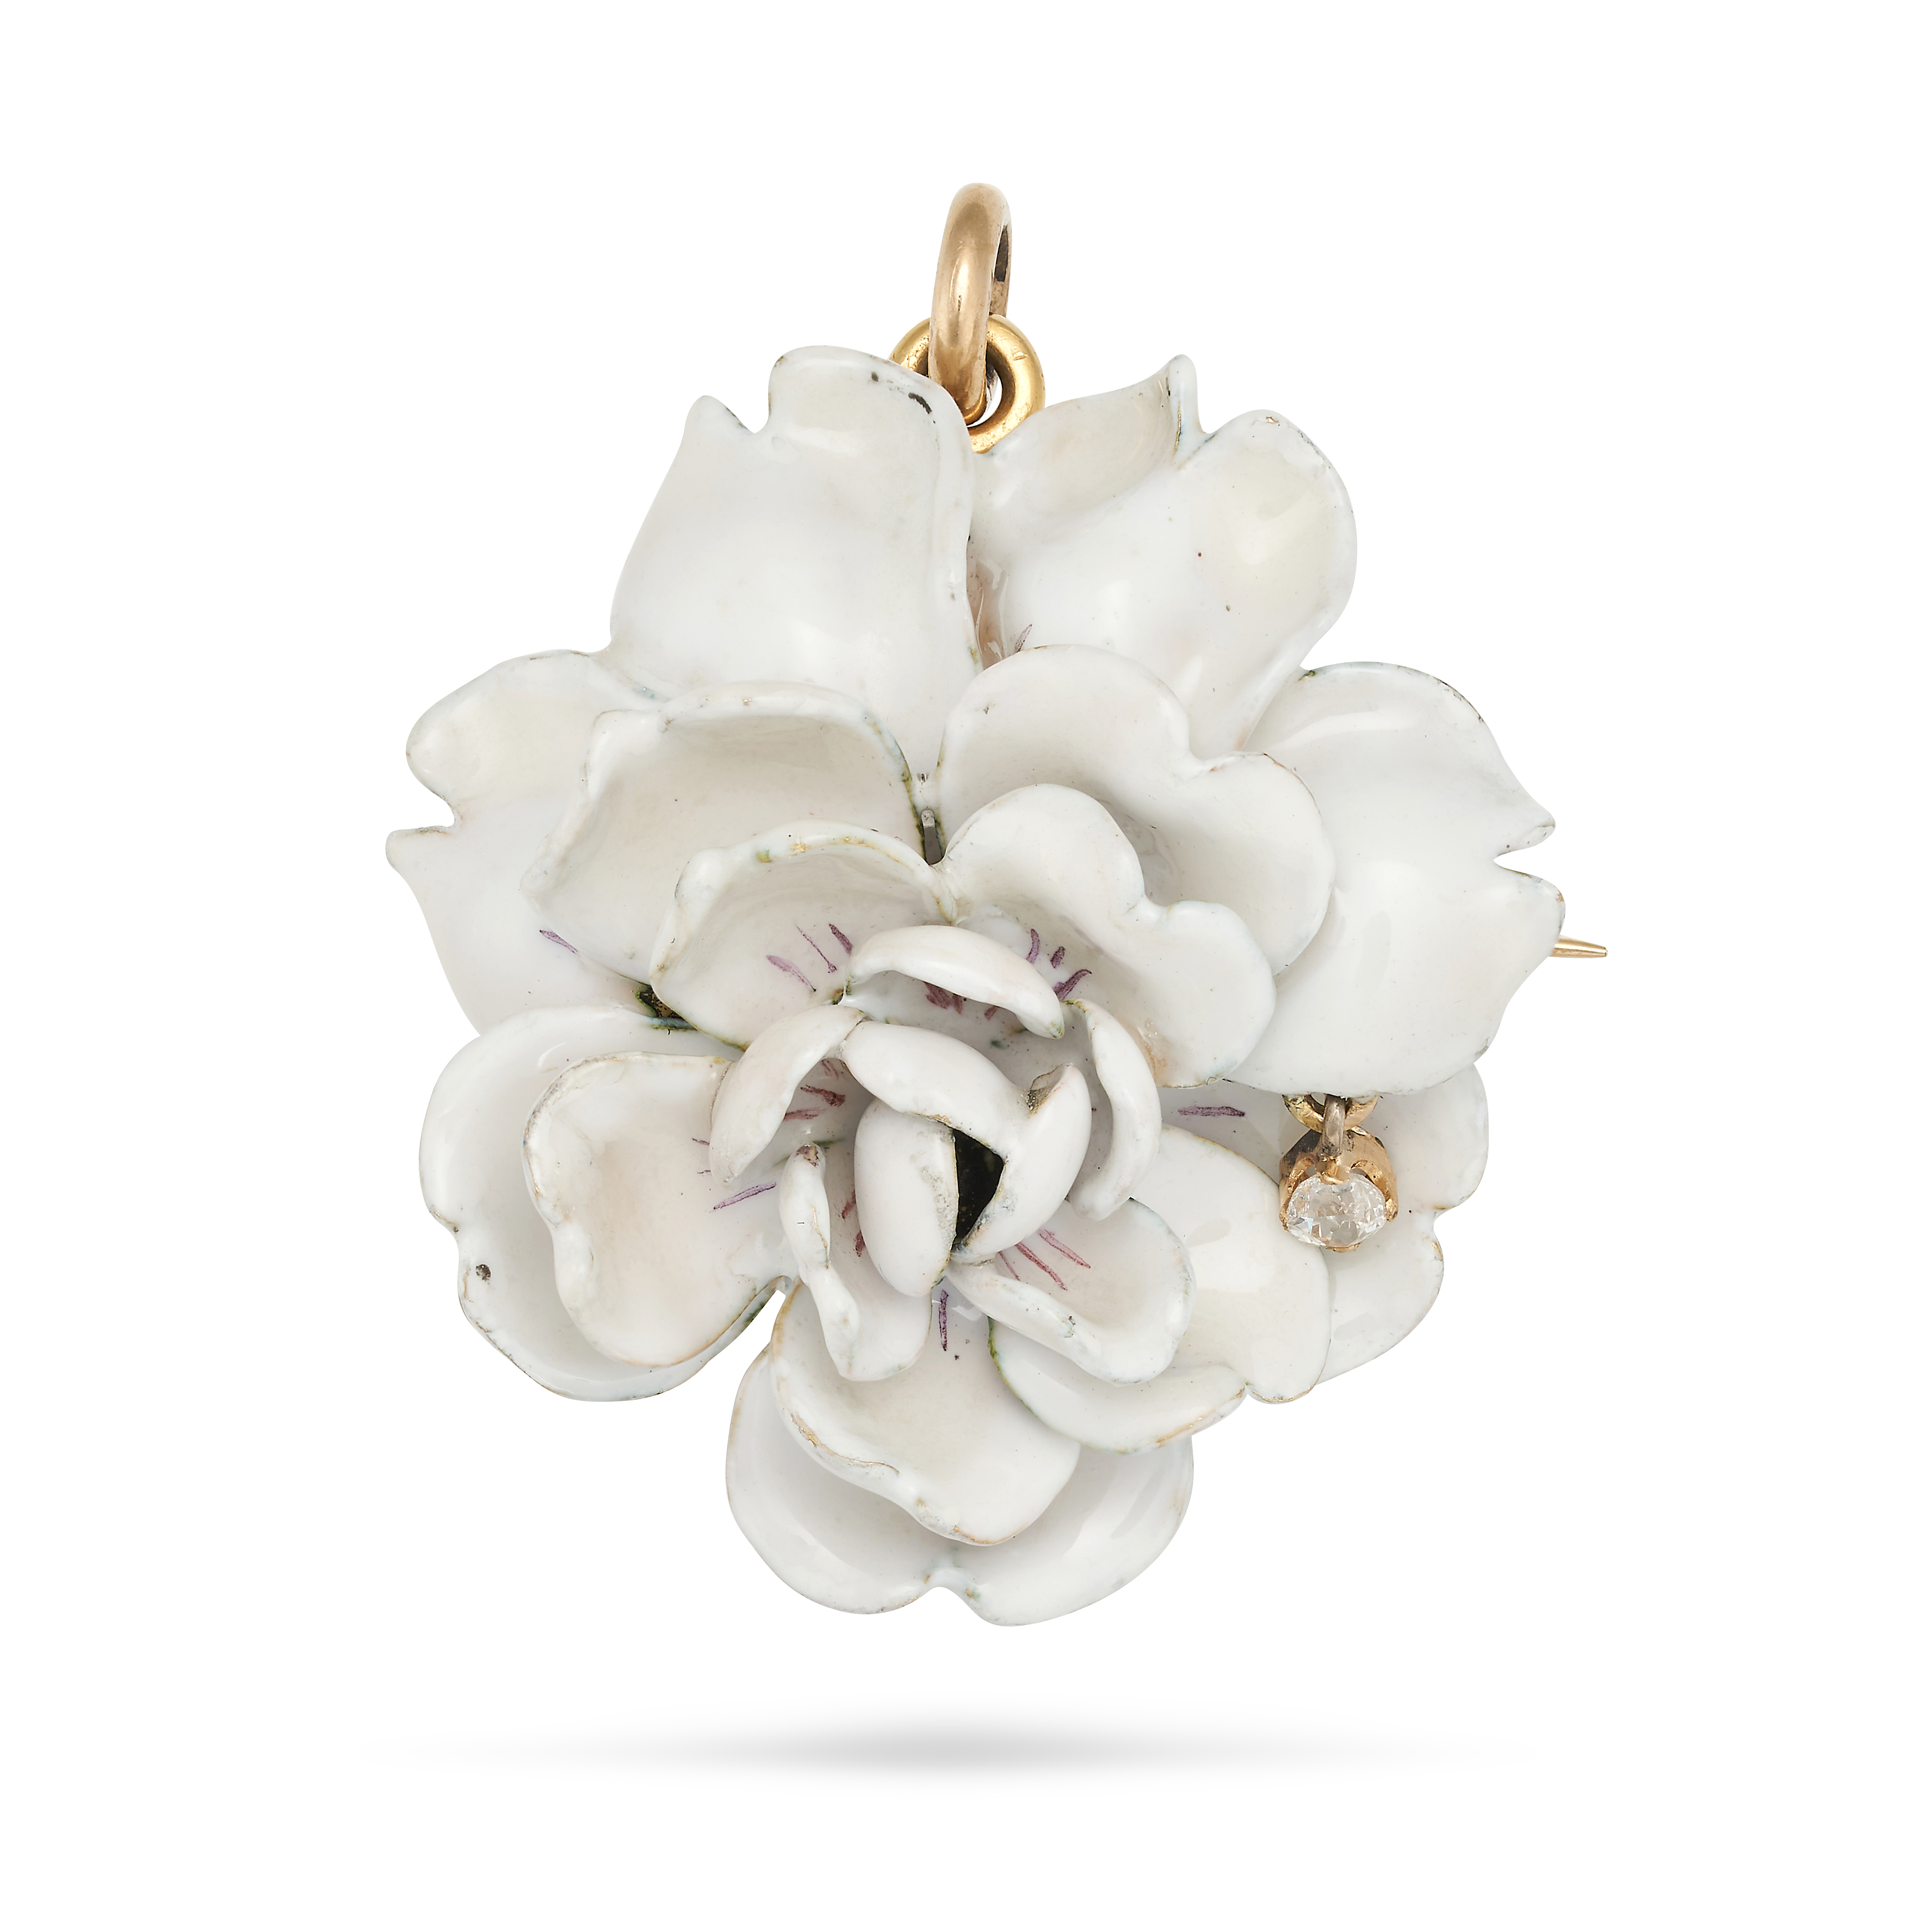 TIFFANY & CO., A VINTAGE ENAMEL AND DIAMOND ROSE BROOCH / PENDANT in yellow gold, designed as a r...